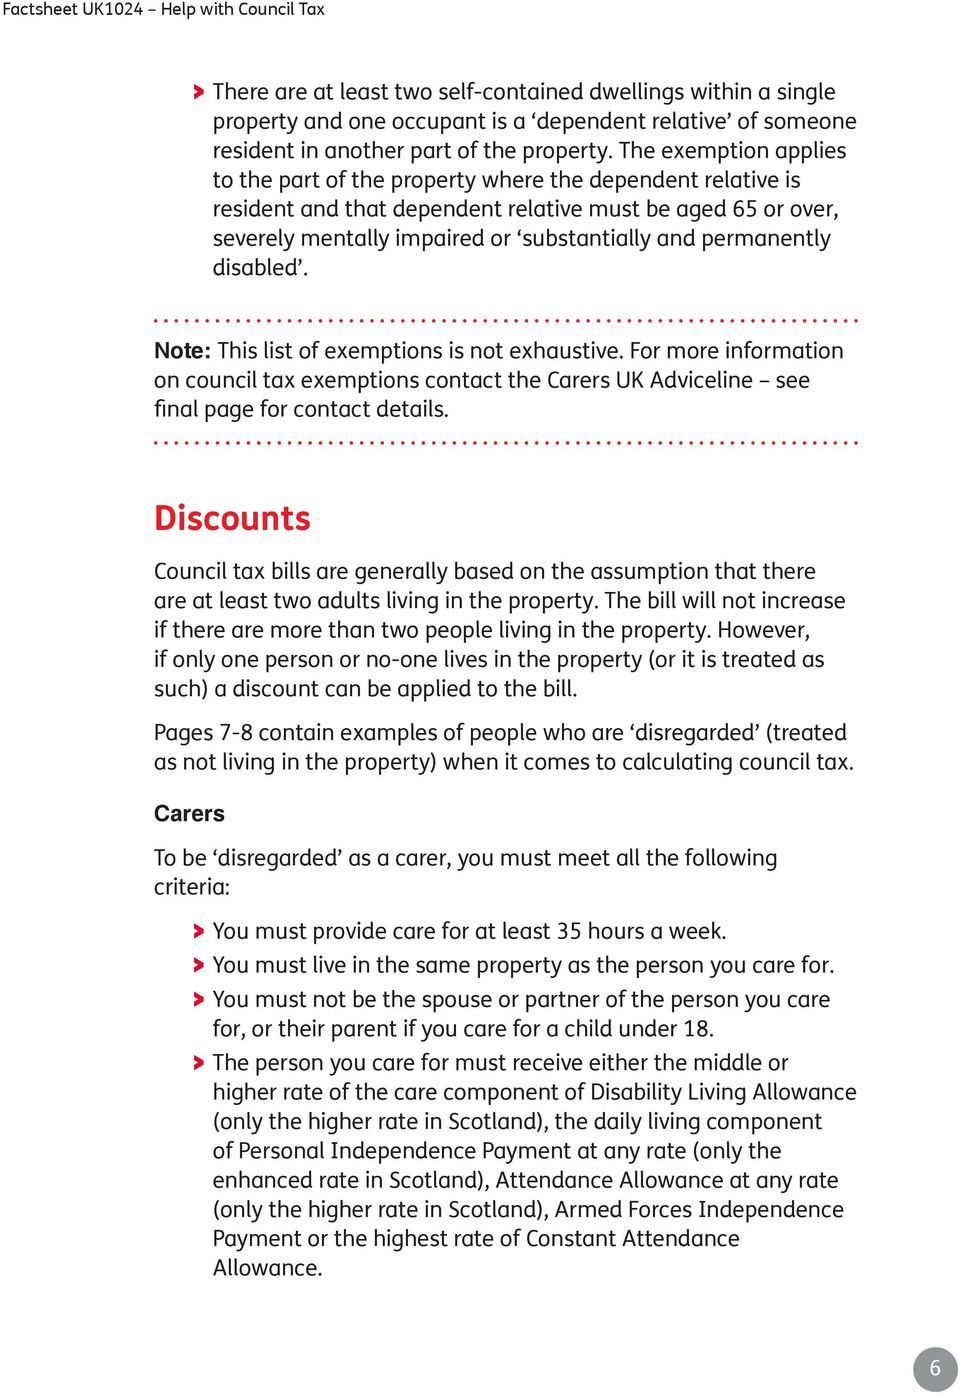 permanently disabled. Note: This list of exemptions is not exhaustive. For more information on council tax exemptions contact the Carers UK Adviceline see final page for contact details.